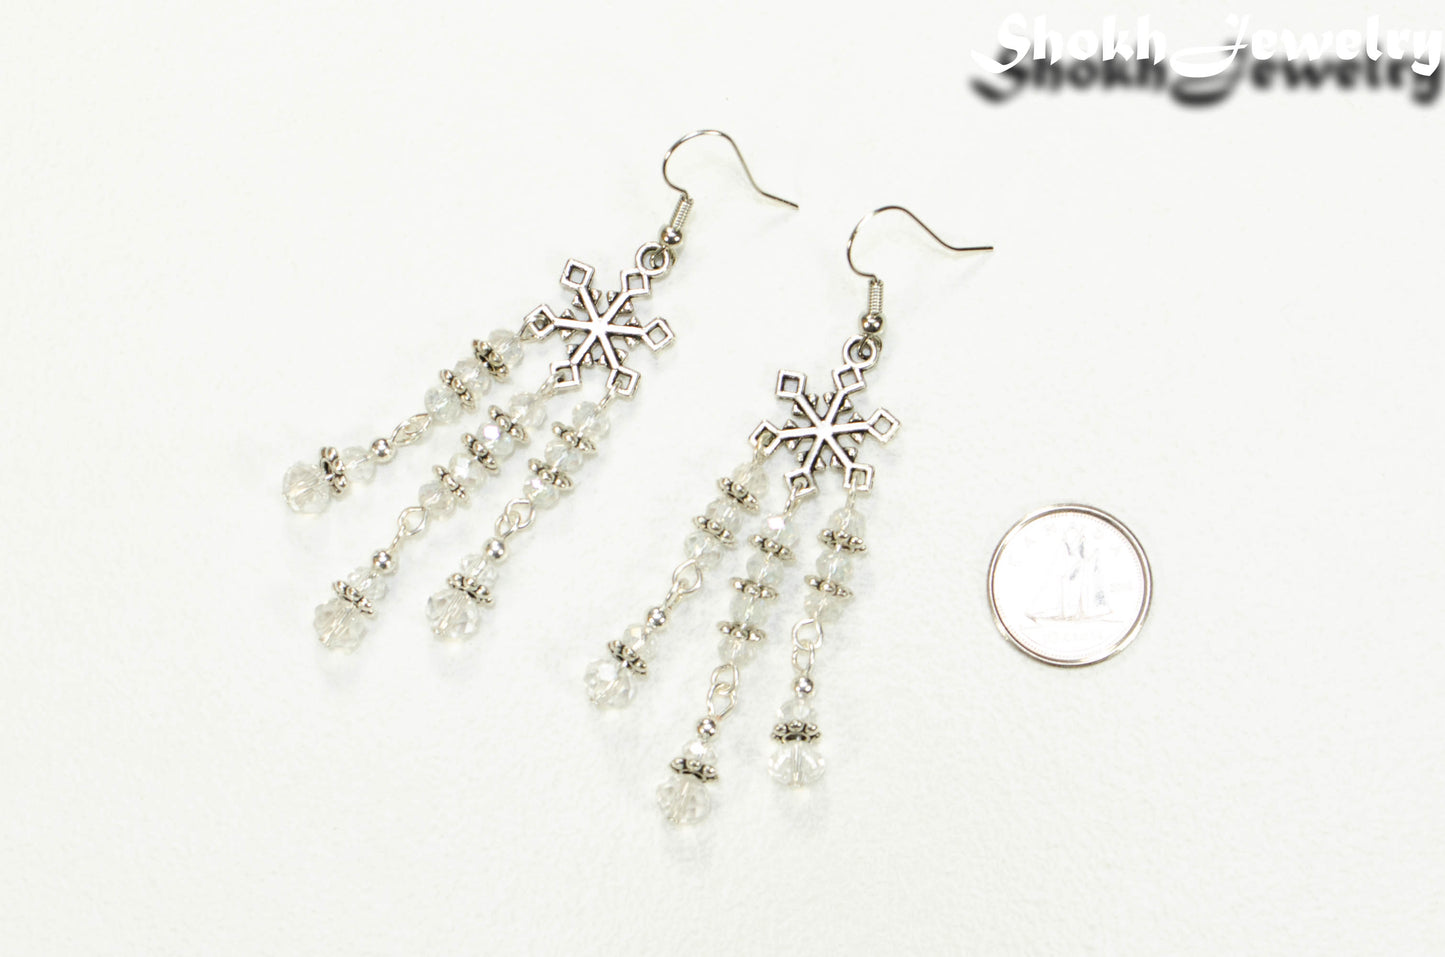 Clear Glass Crystal Chandelier and Snowflakes Earrings beside a dime.